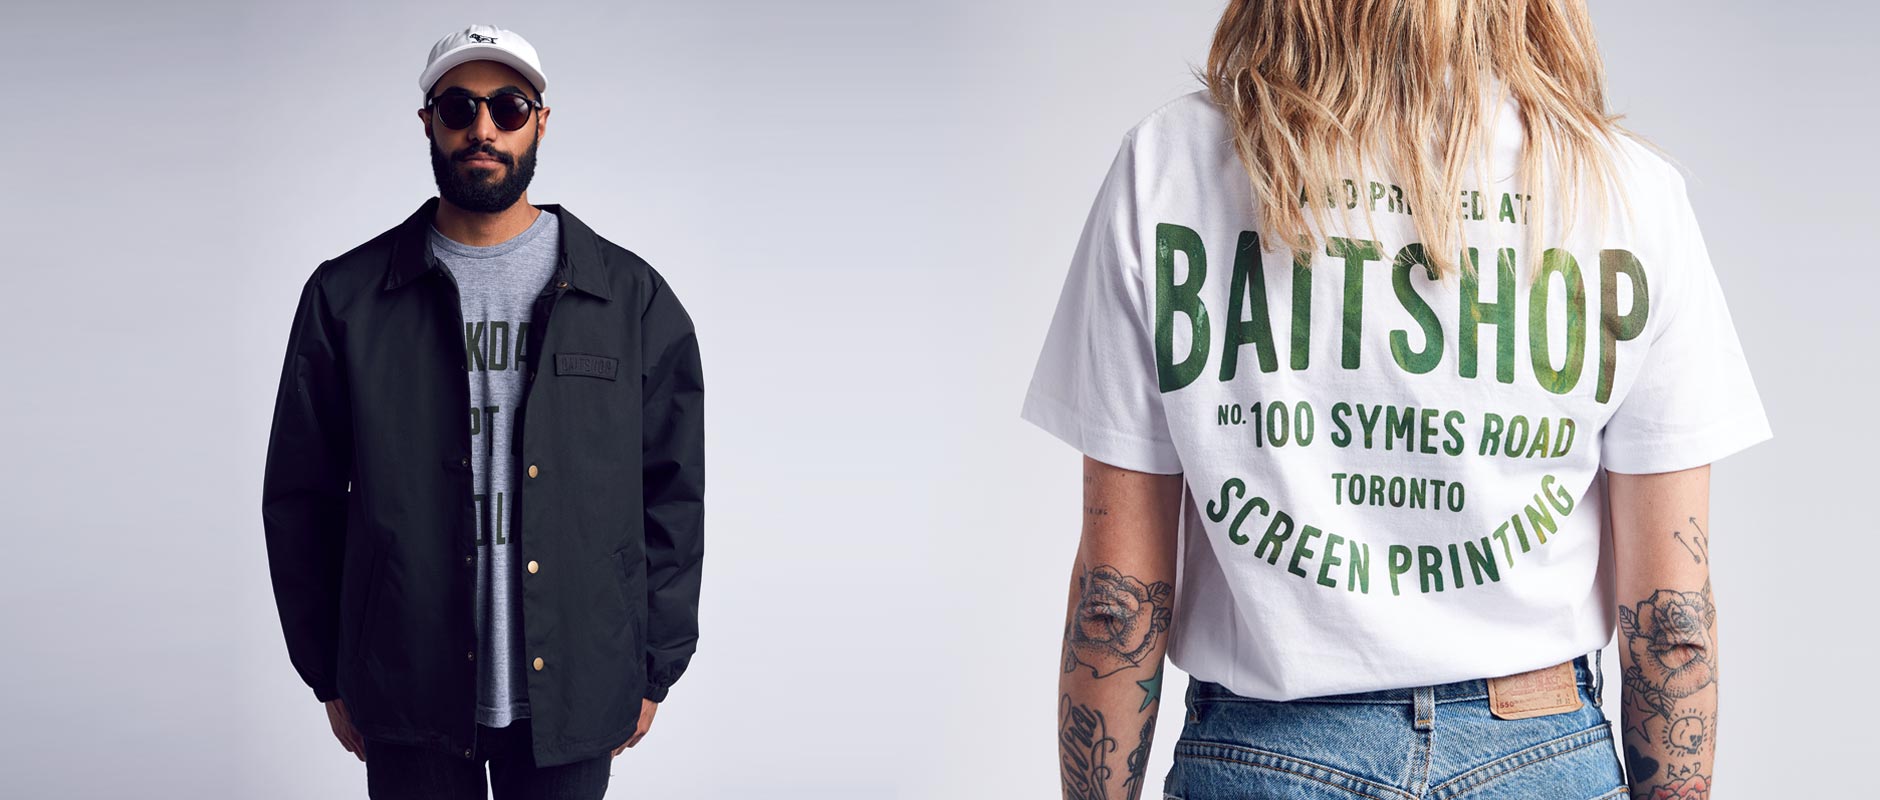 Male model on left with Baitshop Hunting Dad Hat and Coach Jacket, Female model on right with Stockyards sear sucker t-shirt